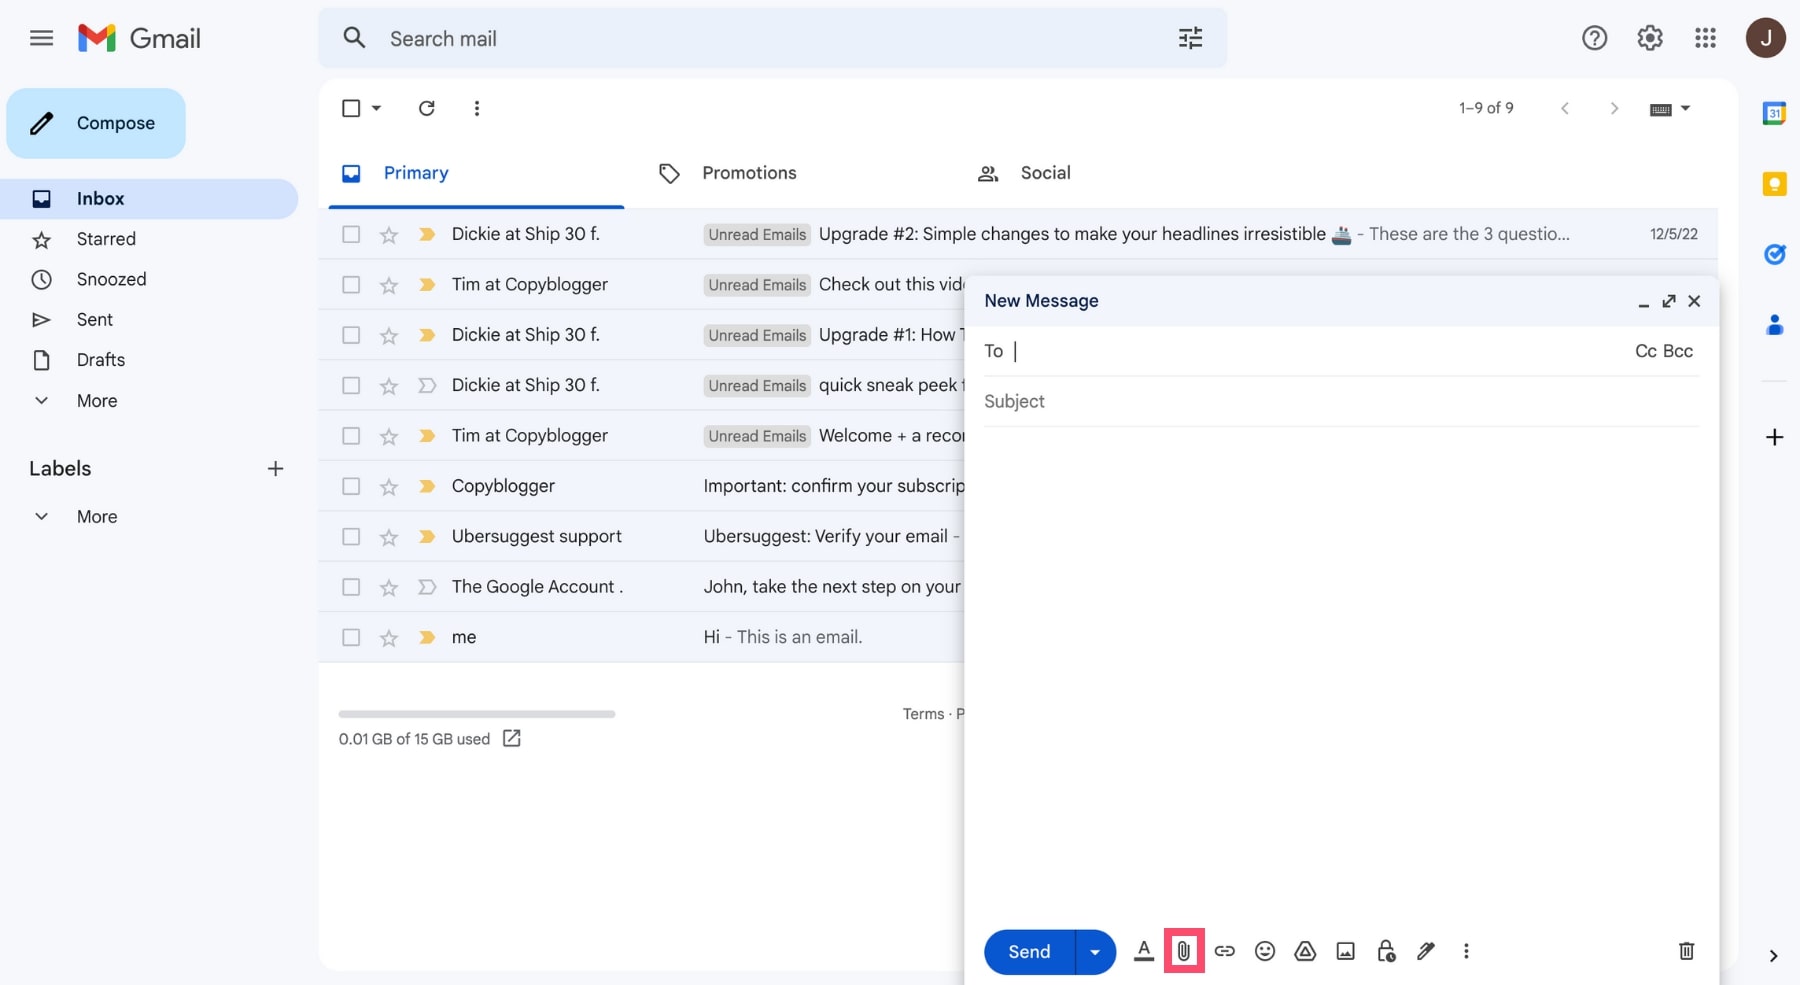 Attach files to your emails in Gmail